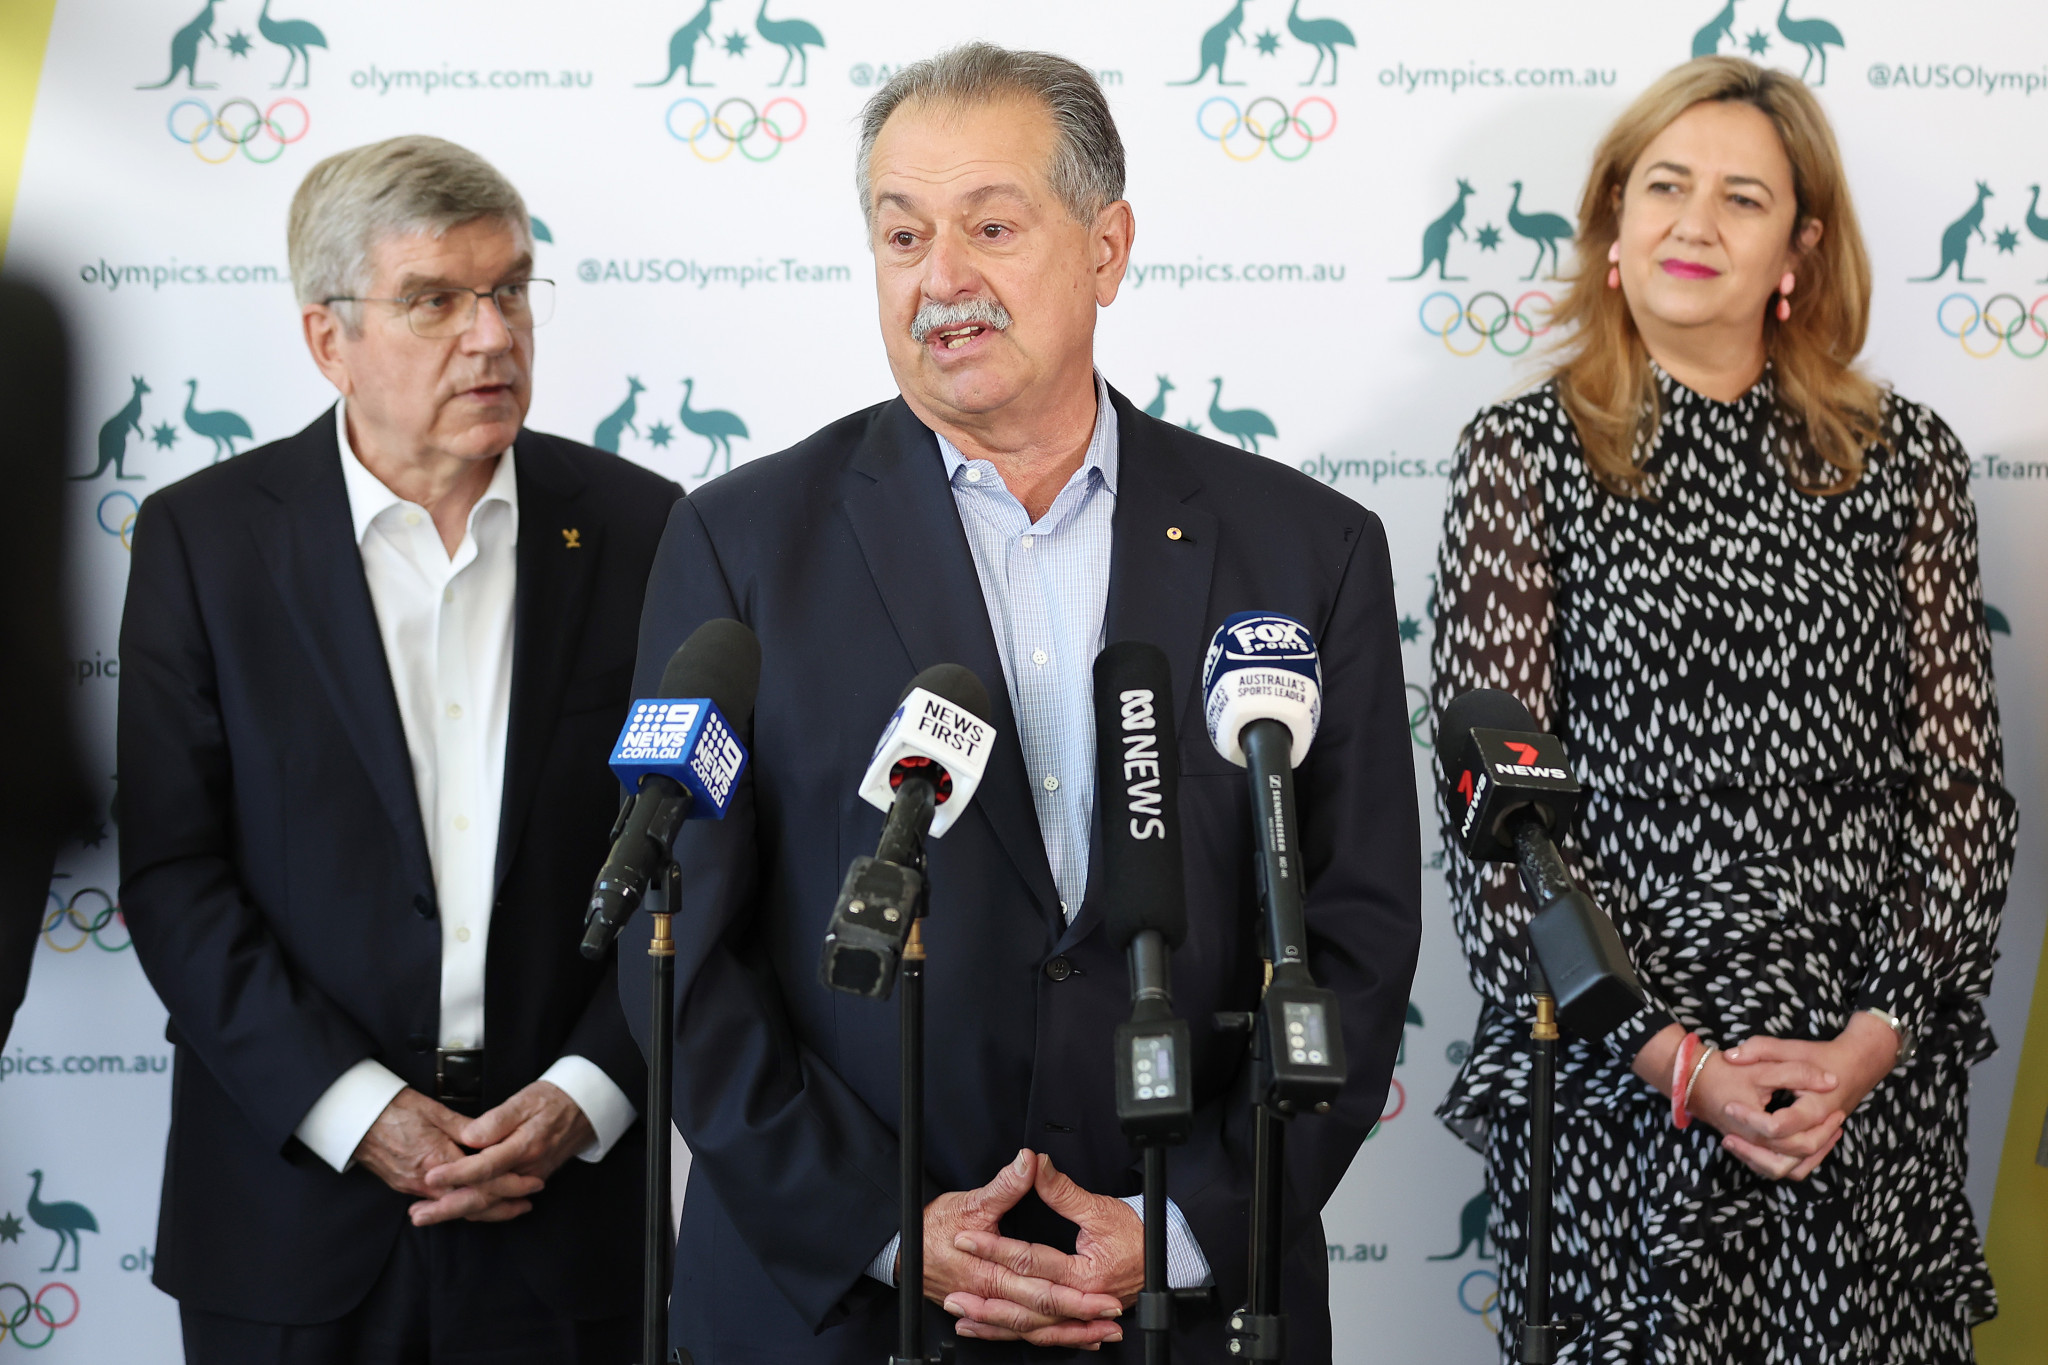 Brisbane 2032 President Andrew Liveris is hoping to attract tourists and fans to South East Queensland long before the Games begin in 10 years' time with the help of "a compelling brand" ©Getty Images